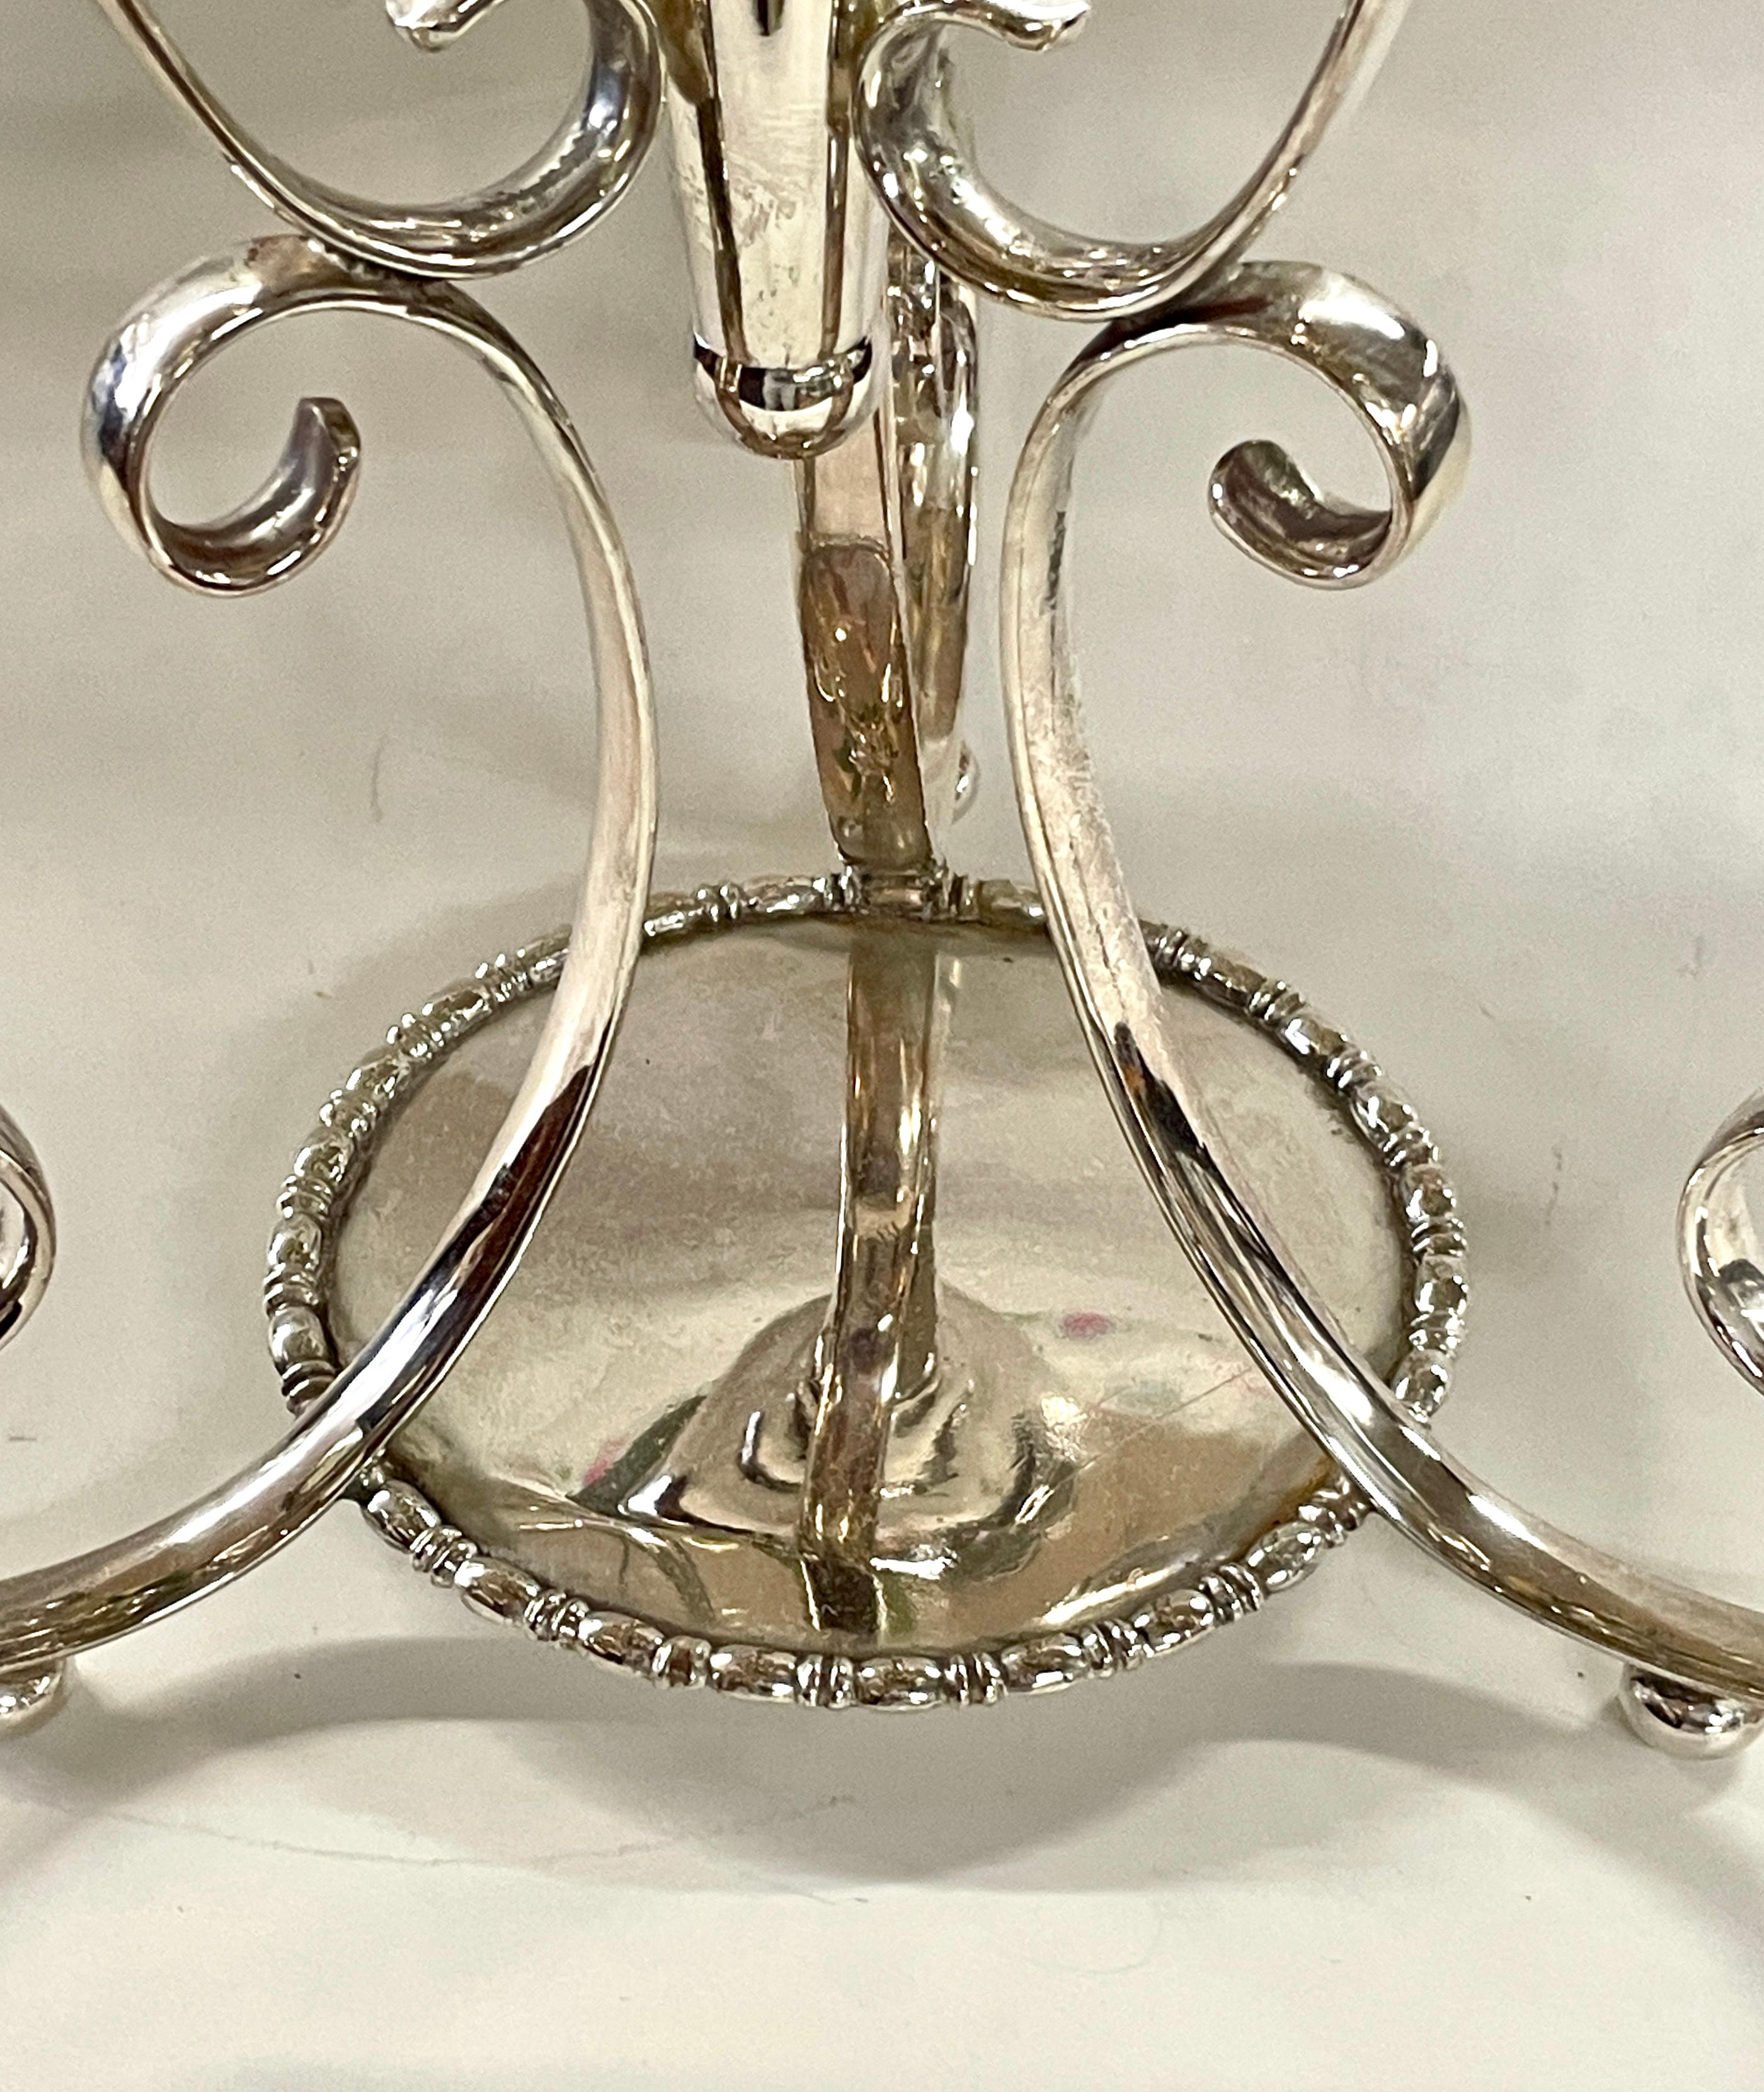 Superb Antique English Sheffield Silver Plate 4-Tube Floral Epergne Centerpiece For Sale 1